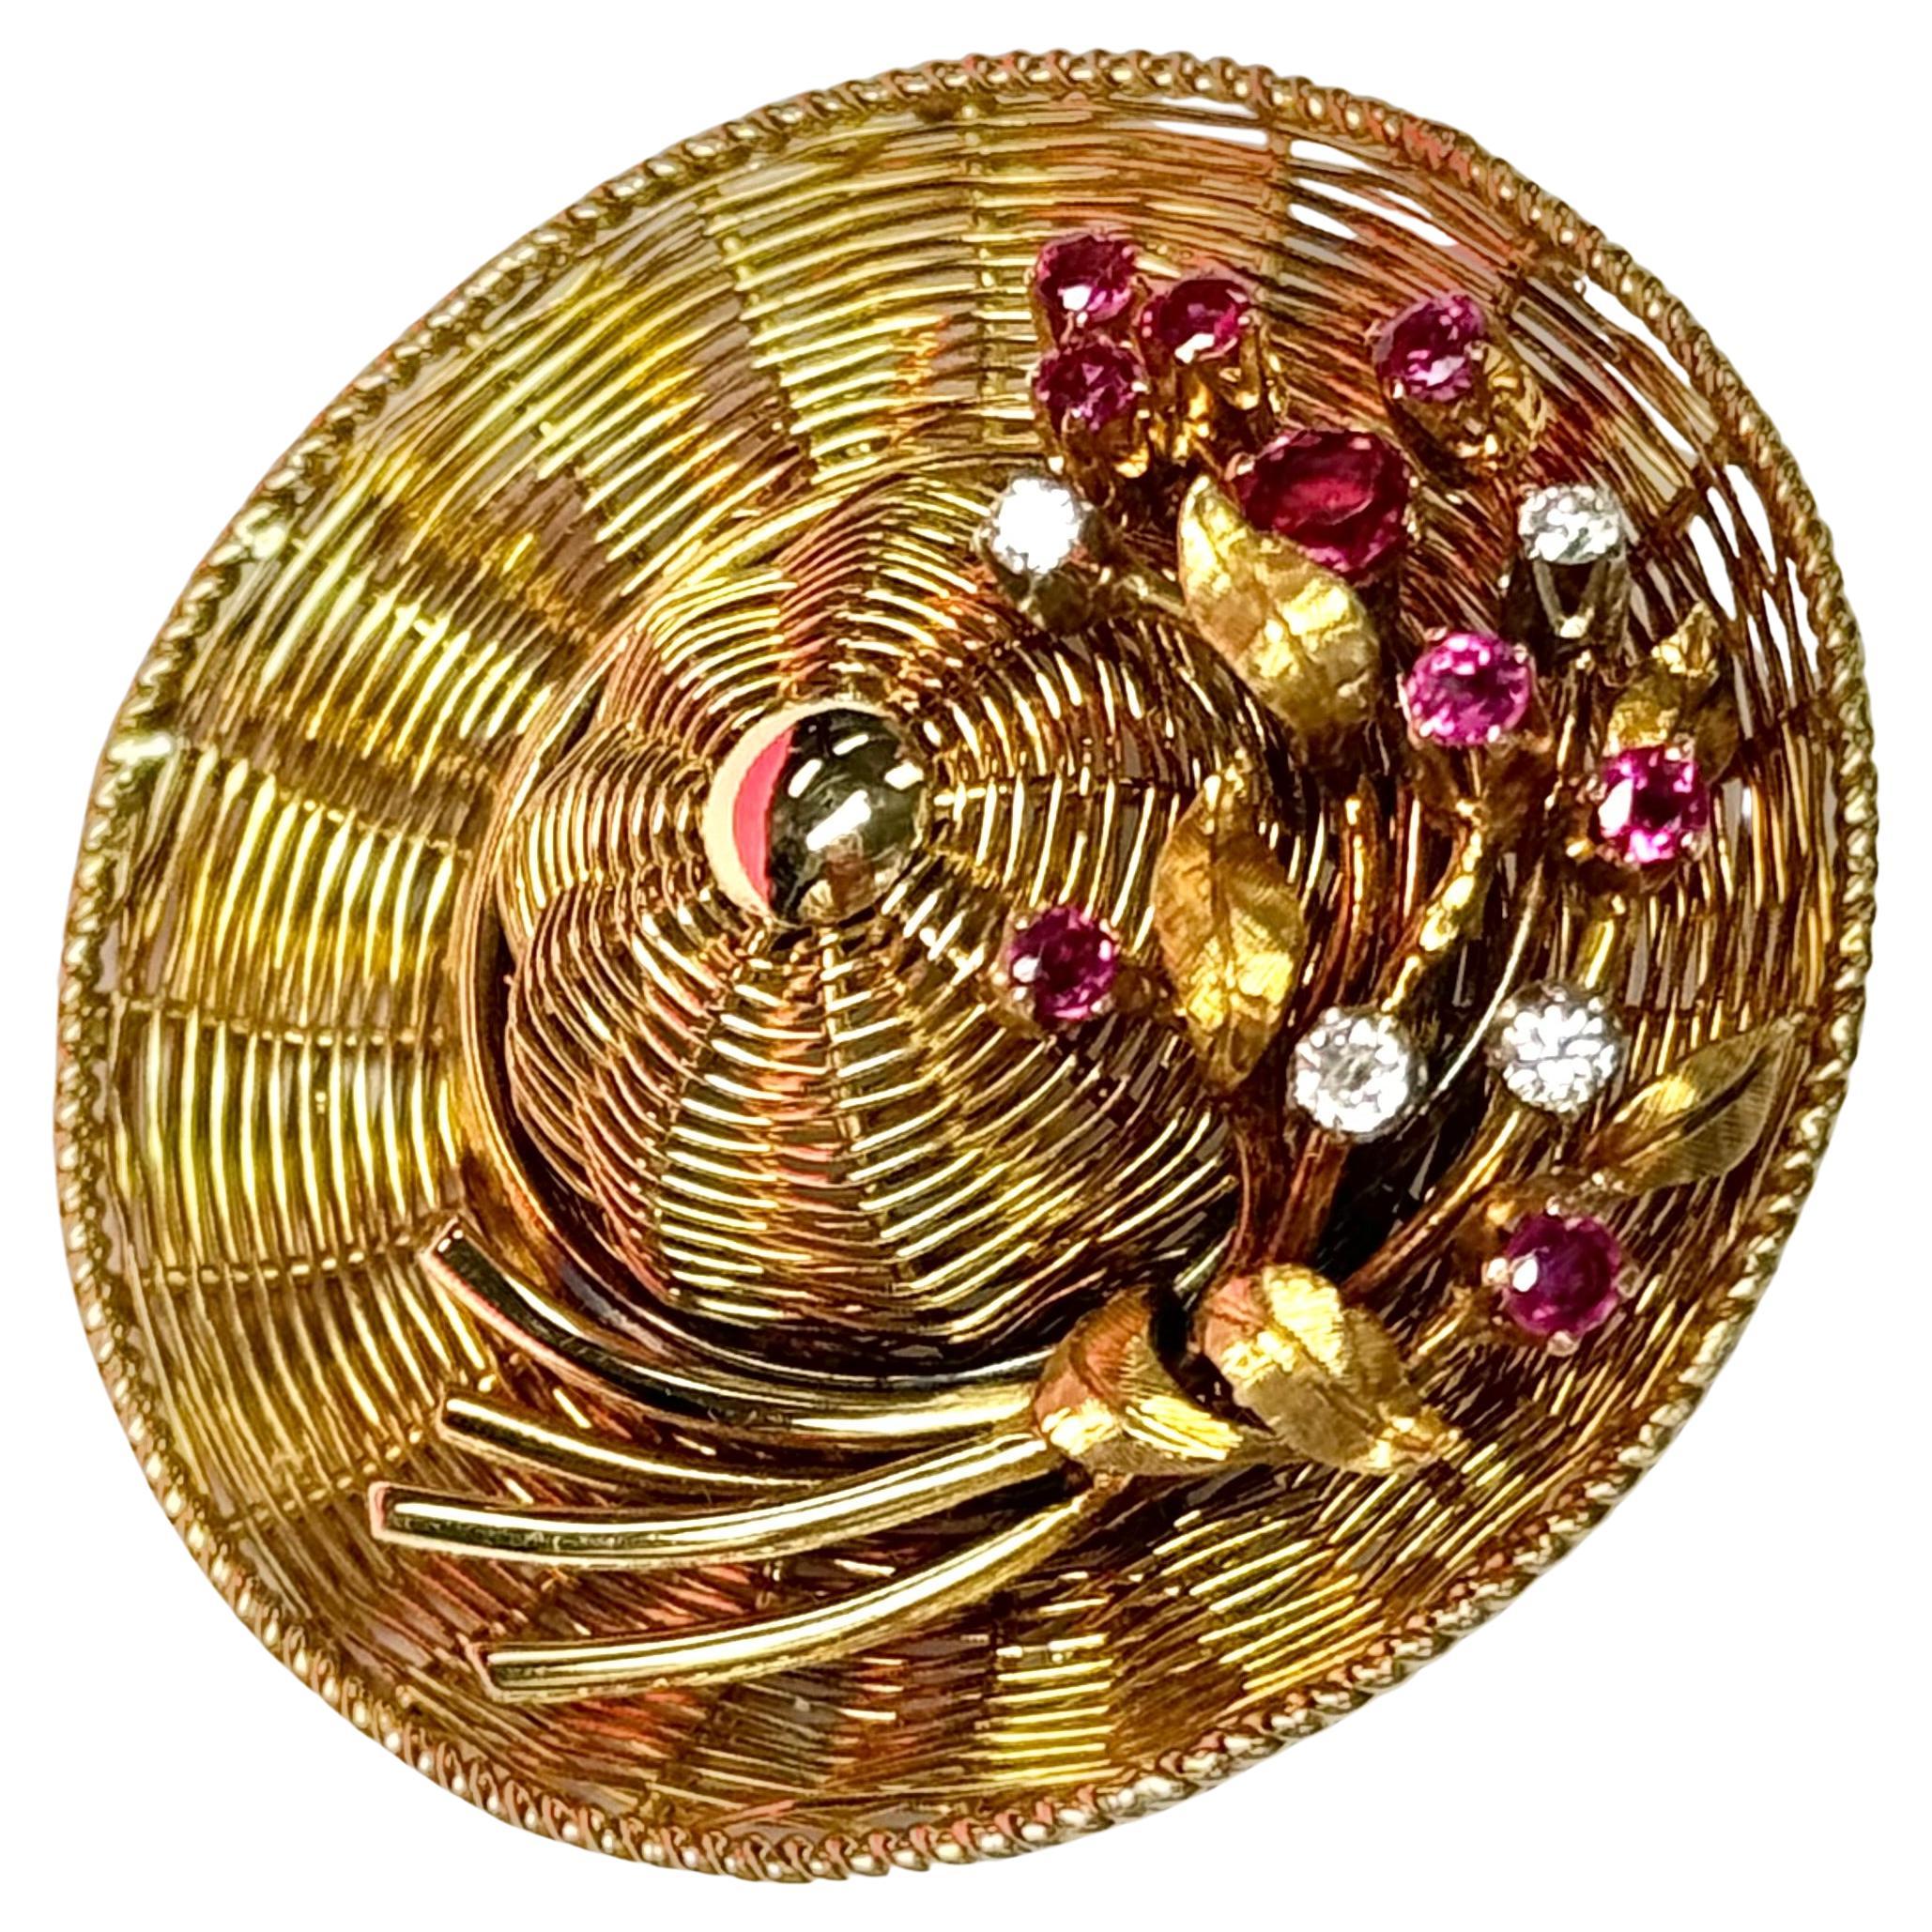 Rare, antique Tiffany & Co. brooch in 18k yellow gold with diamond and ruby accents. The exquisite, whimsical hat design is masterfully crafted in a rich golden woven design, and delicately adorned with diamond and ruby flowers, accented with